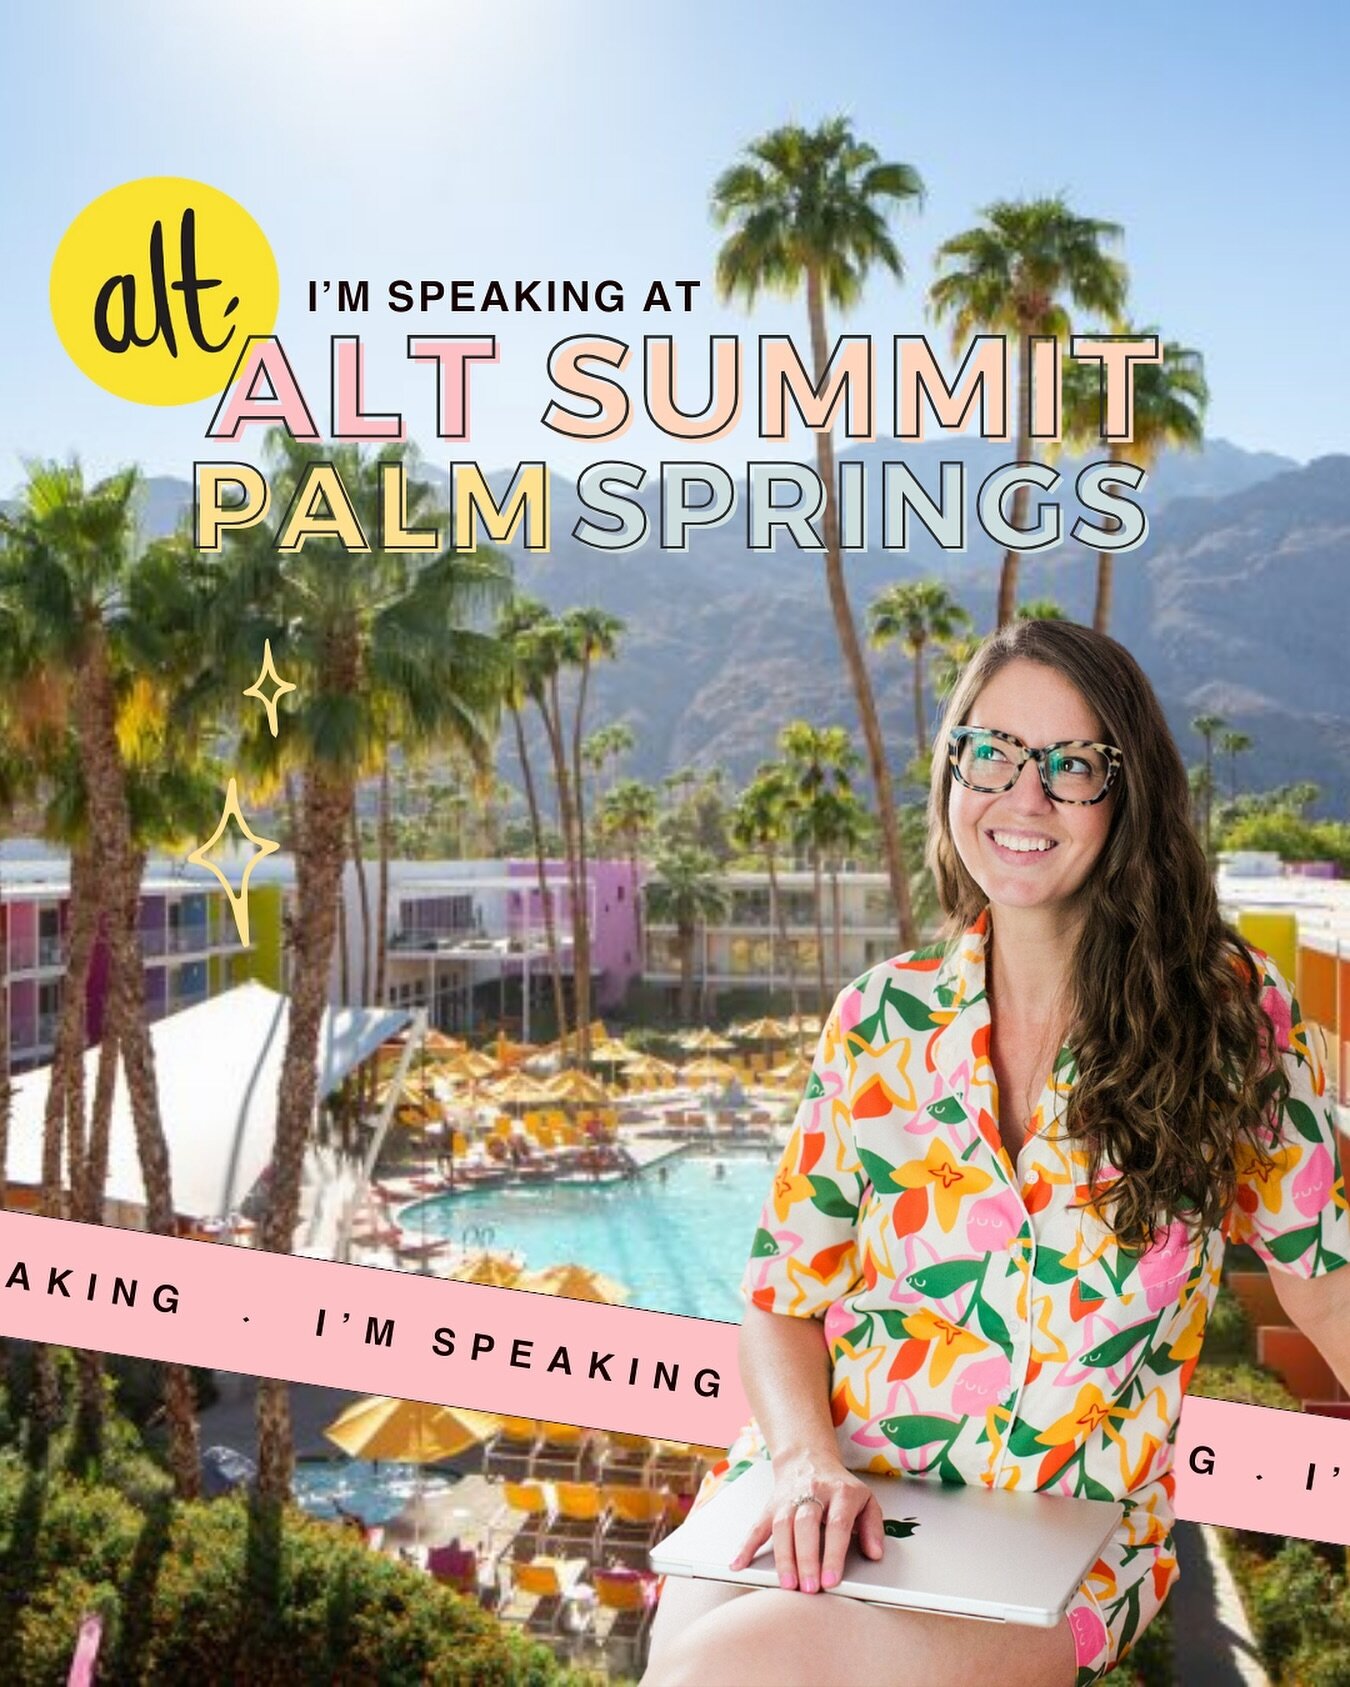 I still can&rsquo;t believe I get to say I am speaking at Alt Summit. 🥹

When I applied I didn&rsquo;t think I&rsquo;d get selected, and at first I didn&rsquo;t think I did.&nbsp;

My friend got accepted so I thought, I must not have. But I specific